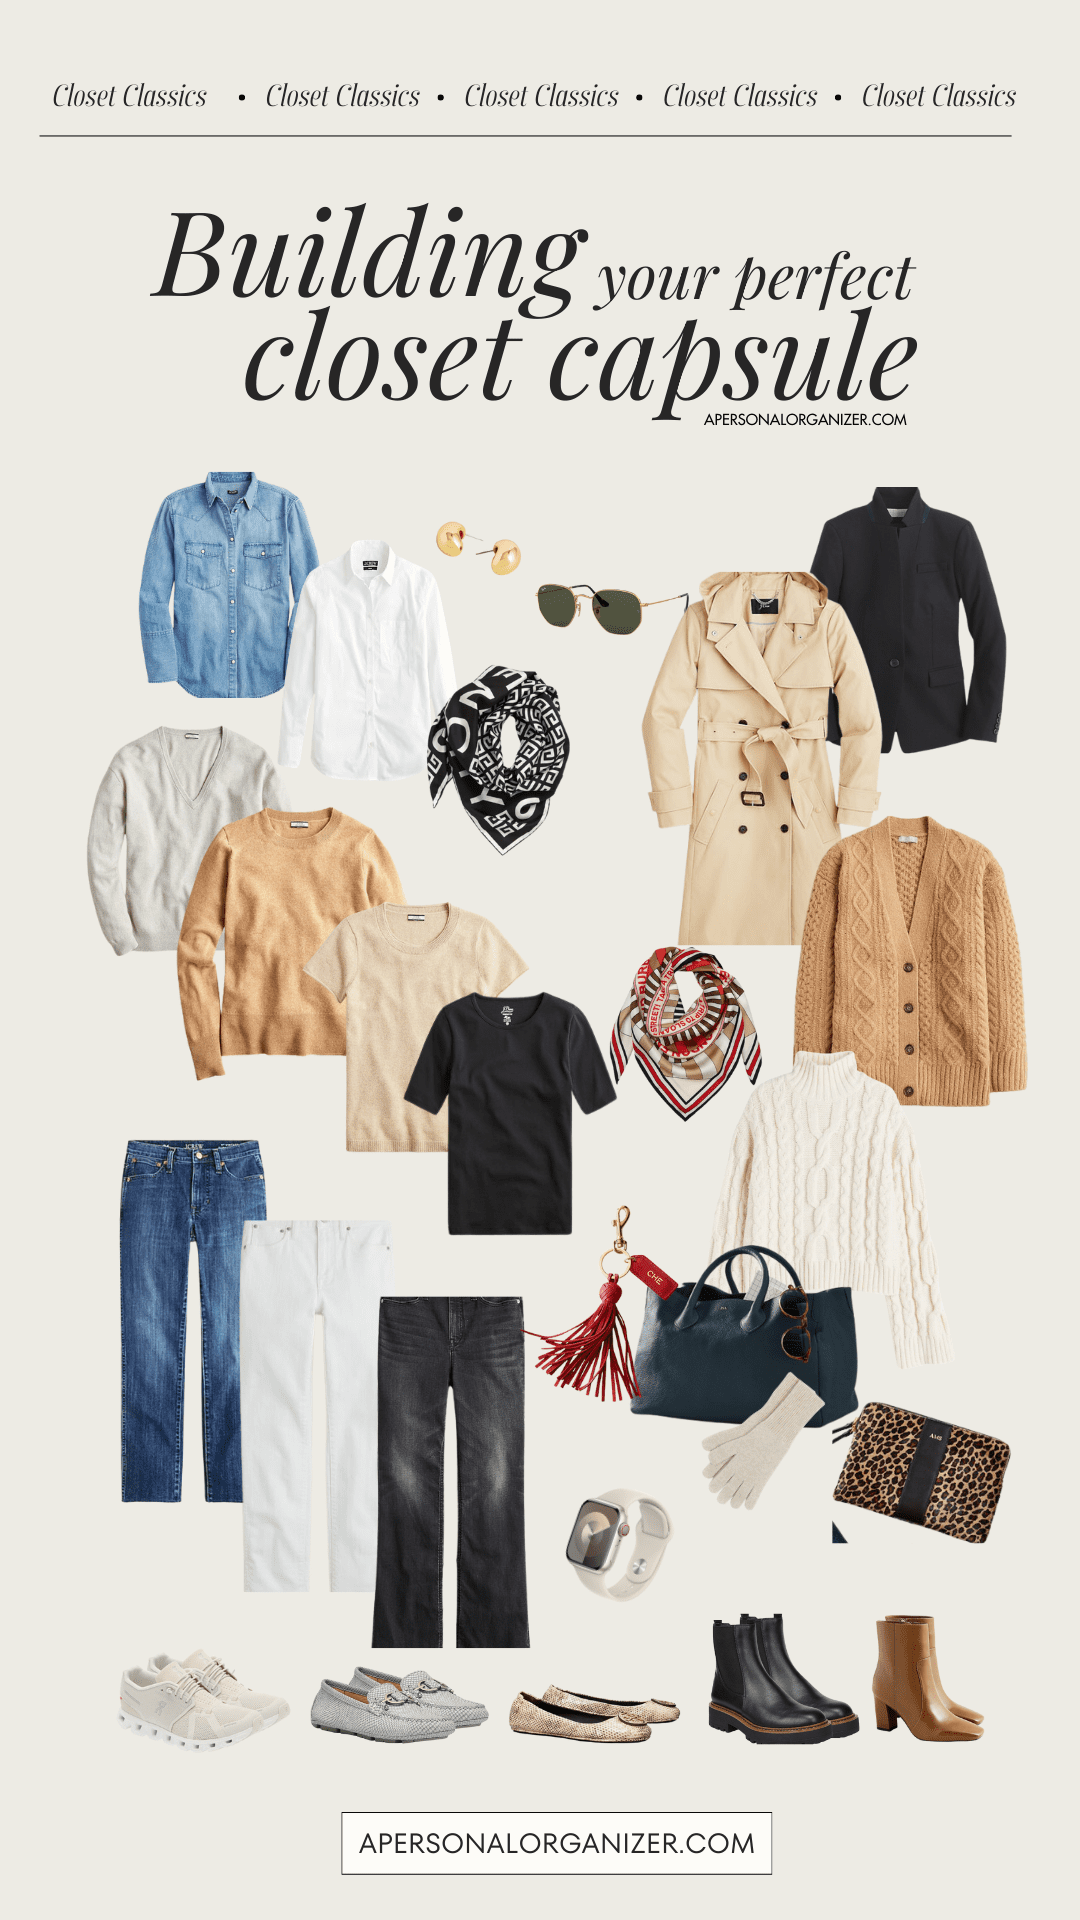 Creating a closet capsule wardrobe with essential items